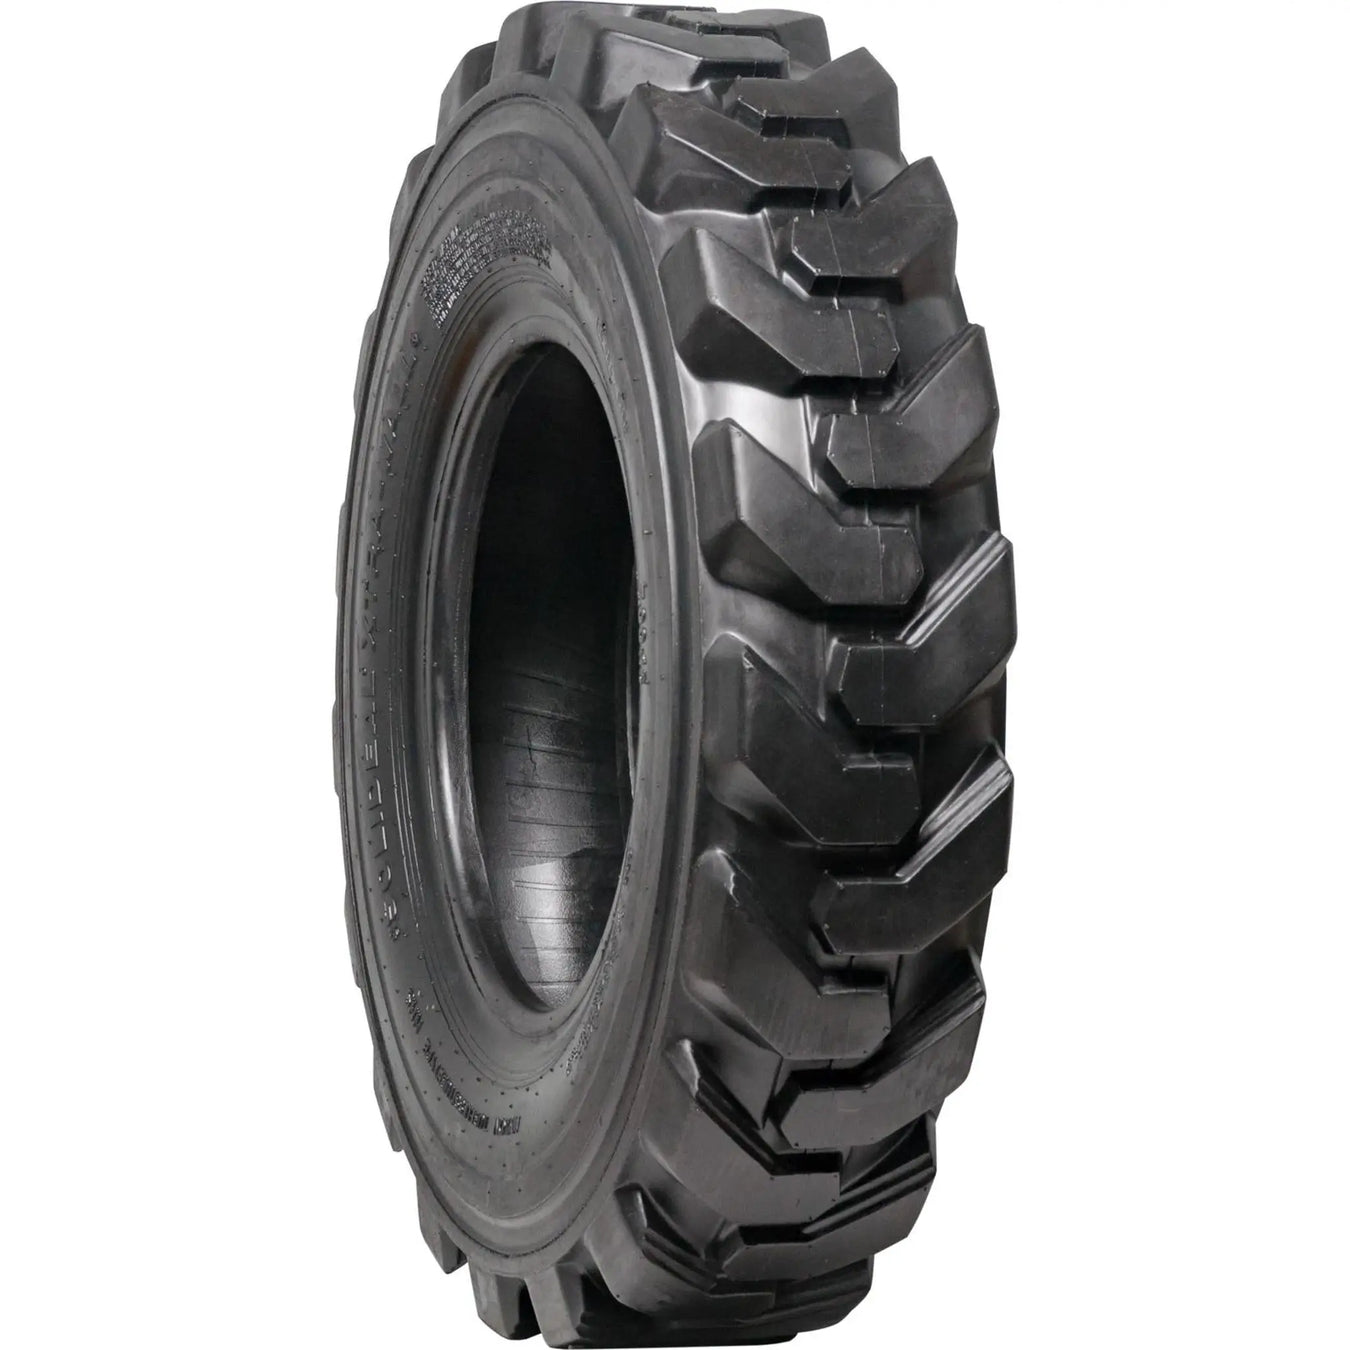 Skid Steer Tires - Pneumatic Tire Size - 7.00-15